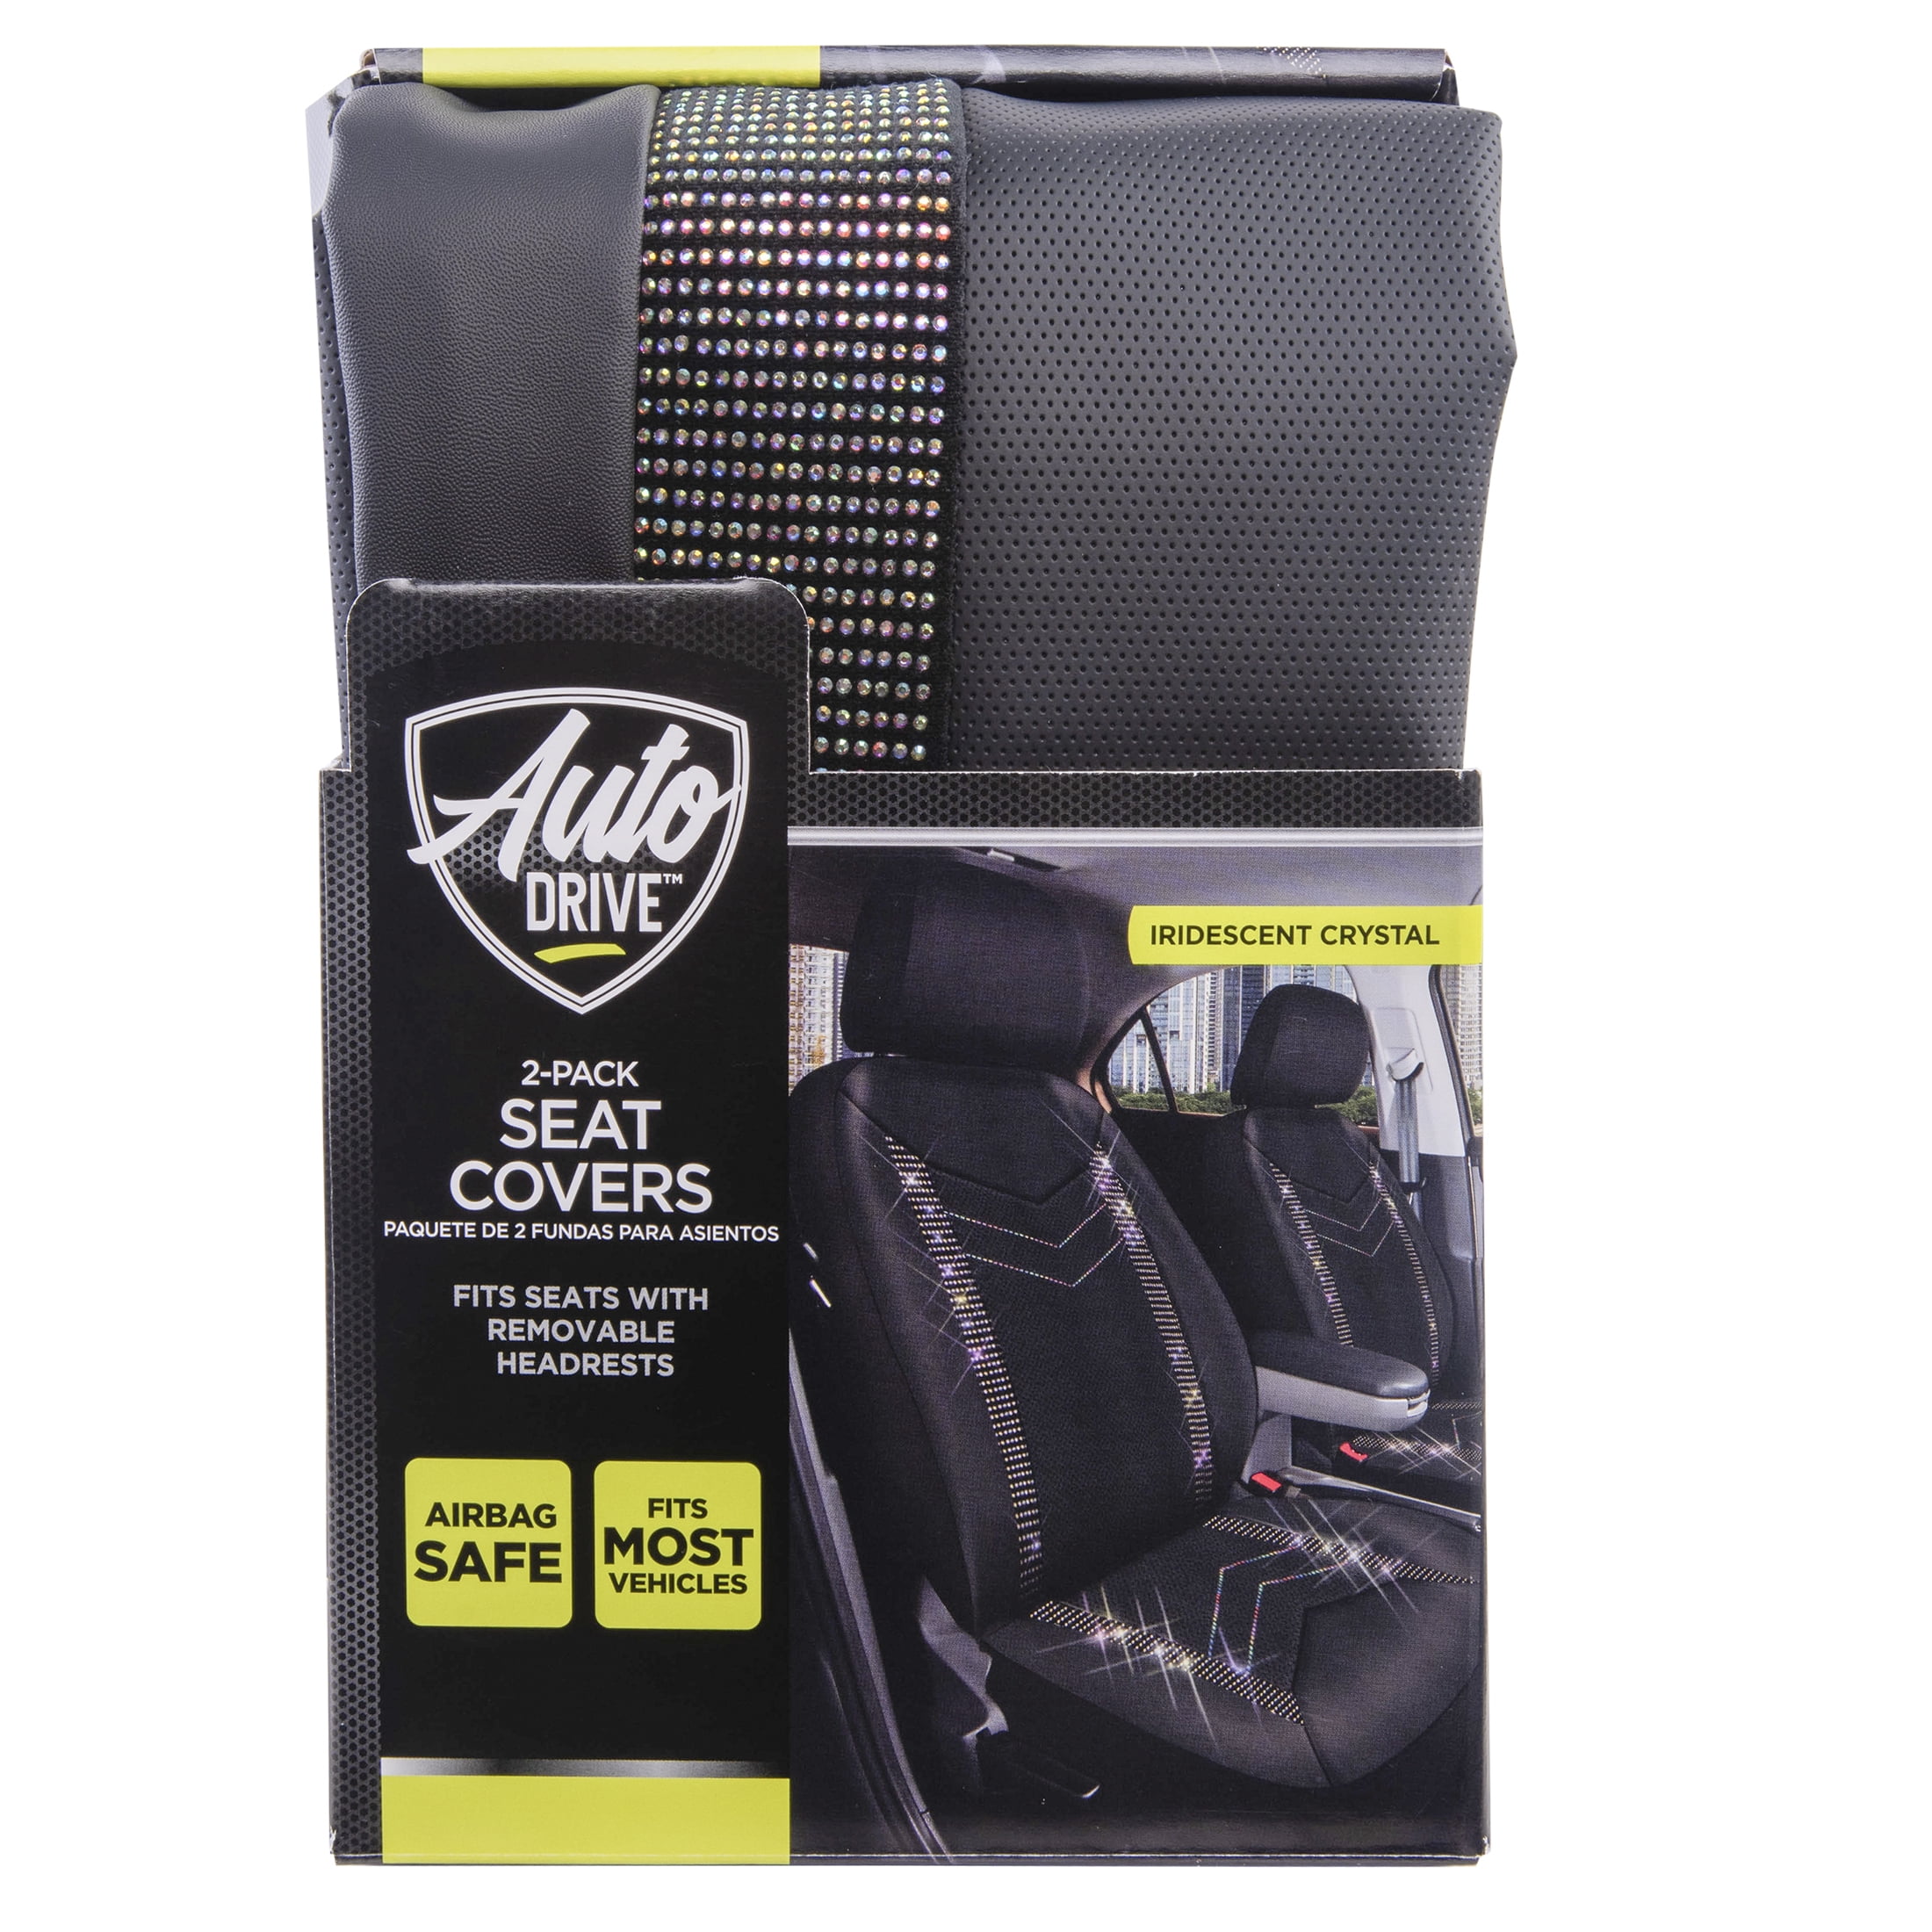 fine_car_interiors - Lv seat cover ( multicolored) One of our best selling  complete seat covers, grab yours now and lit up ur car interior ~~~  Packages comes with matching steering cover and